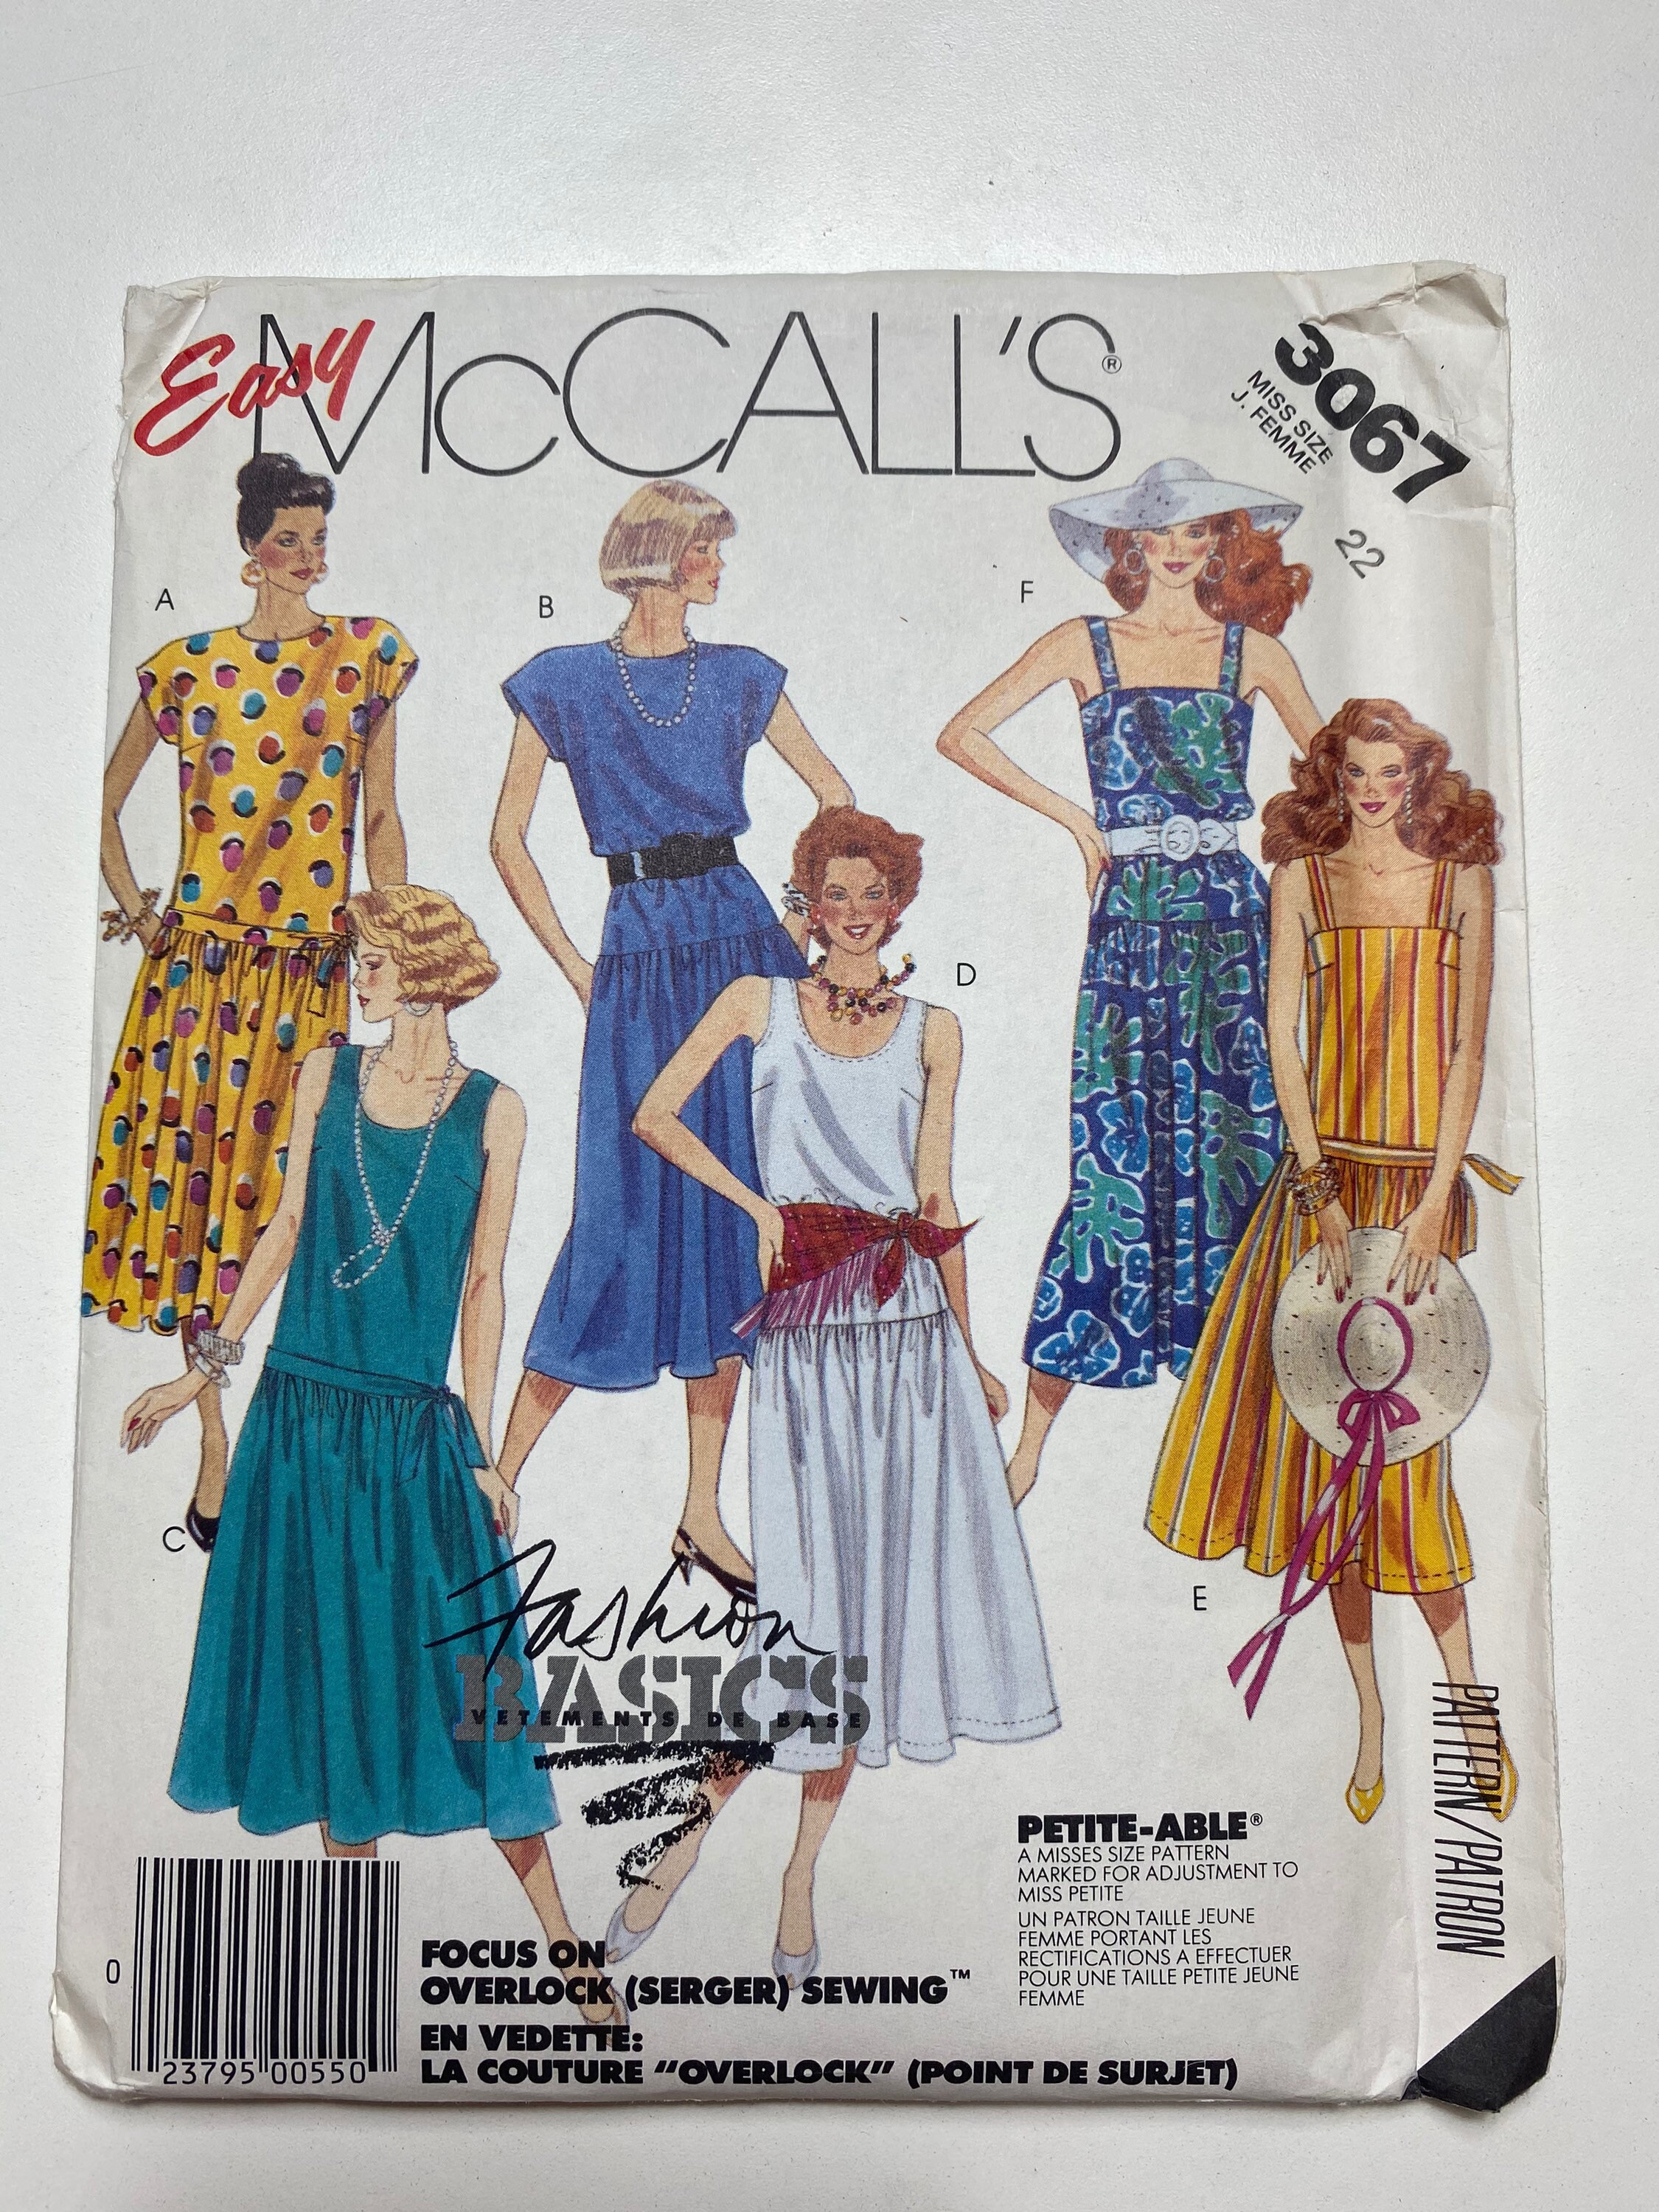 Vintage Simplicity Sewing Pattern No 5286 Size 12 Bust 32 Women's/Misses One-Piece Dress in Two Lengths Easy to Sew Sewing Pattern